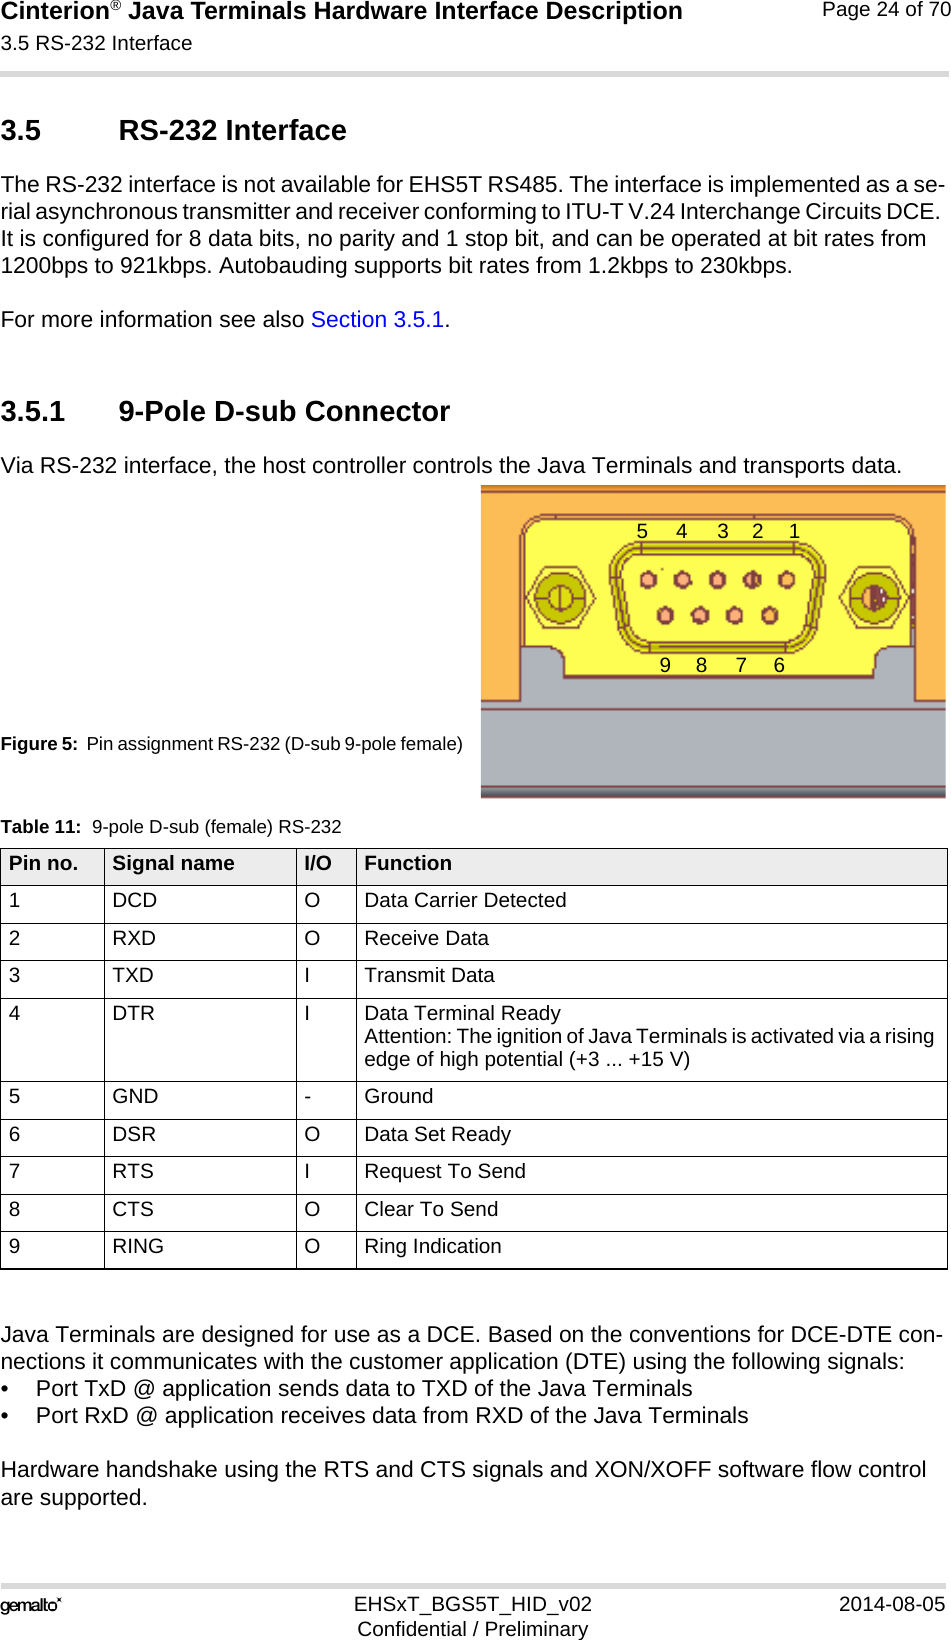 Cinterion® Java Terminals Hardware Interface Description3.5 RS-232 Interface35EHSxT_BGS5T_HID_v02 2014-08-05Confidential / PreliminaryPage 24 of 703.5 RS-232 InterfaceThe RS-232 interface is not available for EHS5T RS485. The interface is implemented as a se-rial asynchronous transmitter and receiver conforming to ITU-T V.24 Interchange Circuits DCE. It is configured for 8 data bits, no parity and 1 stop bit, and can be operated at bit rates from 1200bps to 921kbps. Autobauding supports bit rates from 1.2kbps to 230kbps.For more information see also Section 3.5.1.3.5.1 9-Pole D-sub ConnectorVia RS-232 interface, the host controller controls the Java Terminals and transports data.Figure 5:  Pin assignment RS-232 (D-sub 9-pole female)Java Terminals are designed for use as a DCE. Based on the conventions for DCE-DTE con-nections it communicates with the customer application (DTE) using the following signals:• Port TxD @ application sends data to TXD of the Java Terminals• Port RxD @ application receives data from RXD of the Java TerminalsHardware handshake using the RTS and CTS signals and XON/XOFF software flow control are supported.Table 11:  9-pole D-sub (female) RS-232Pin no. Signal name I/O Function1 DCD O Data Carrier Detected2RXD OReceive Data3 TXD I Transmit Data4 DTR I Data Terminal Ready Attention: The ignition of Java Terminals is activated via a rising edge of high potential (+3 ... +15 V) 5 GND - Ground6 DSR O Data Set Ready7 RTS I Request To Send8 CTS O Clear To Send9 RING O Ring Indication123456789